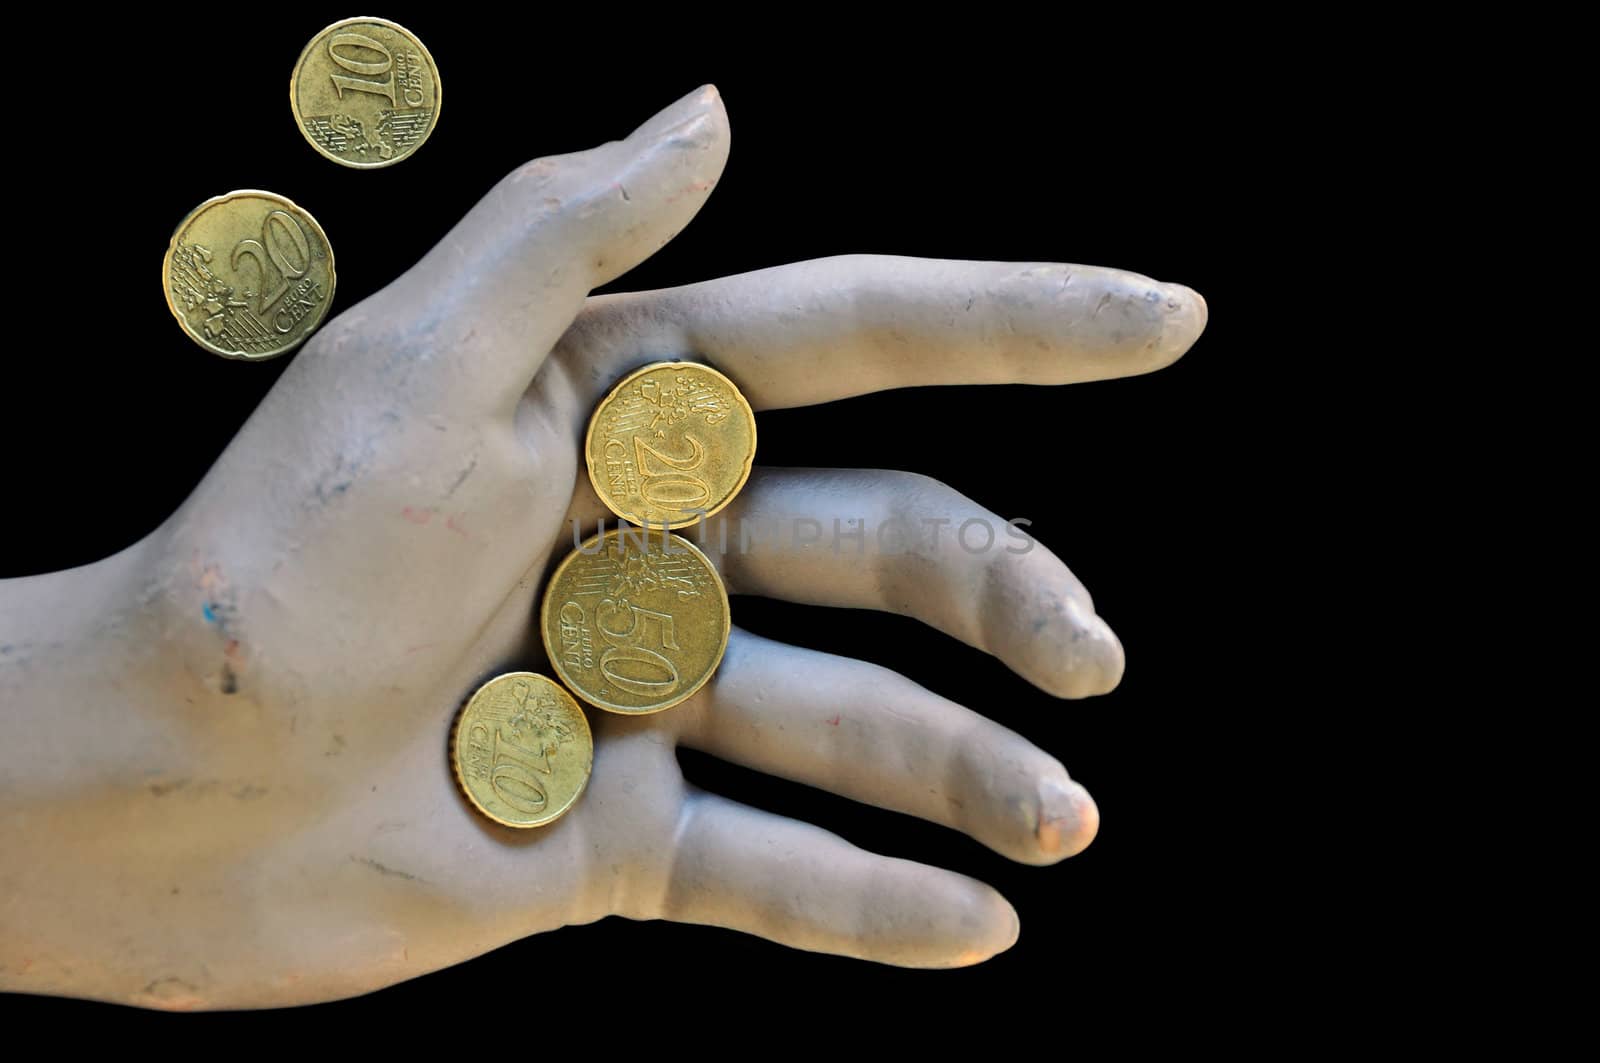 Worn doll hand holding euro coins. Economic and financial issues.